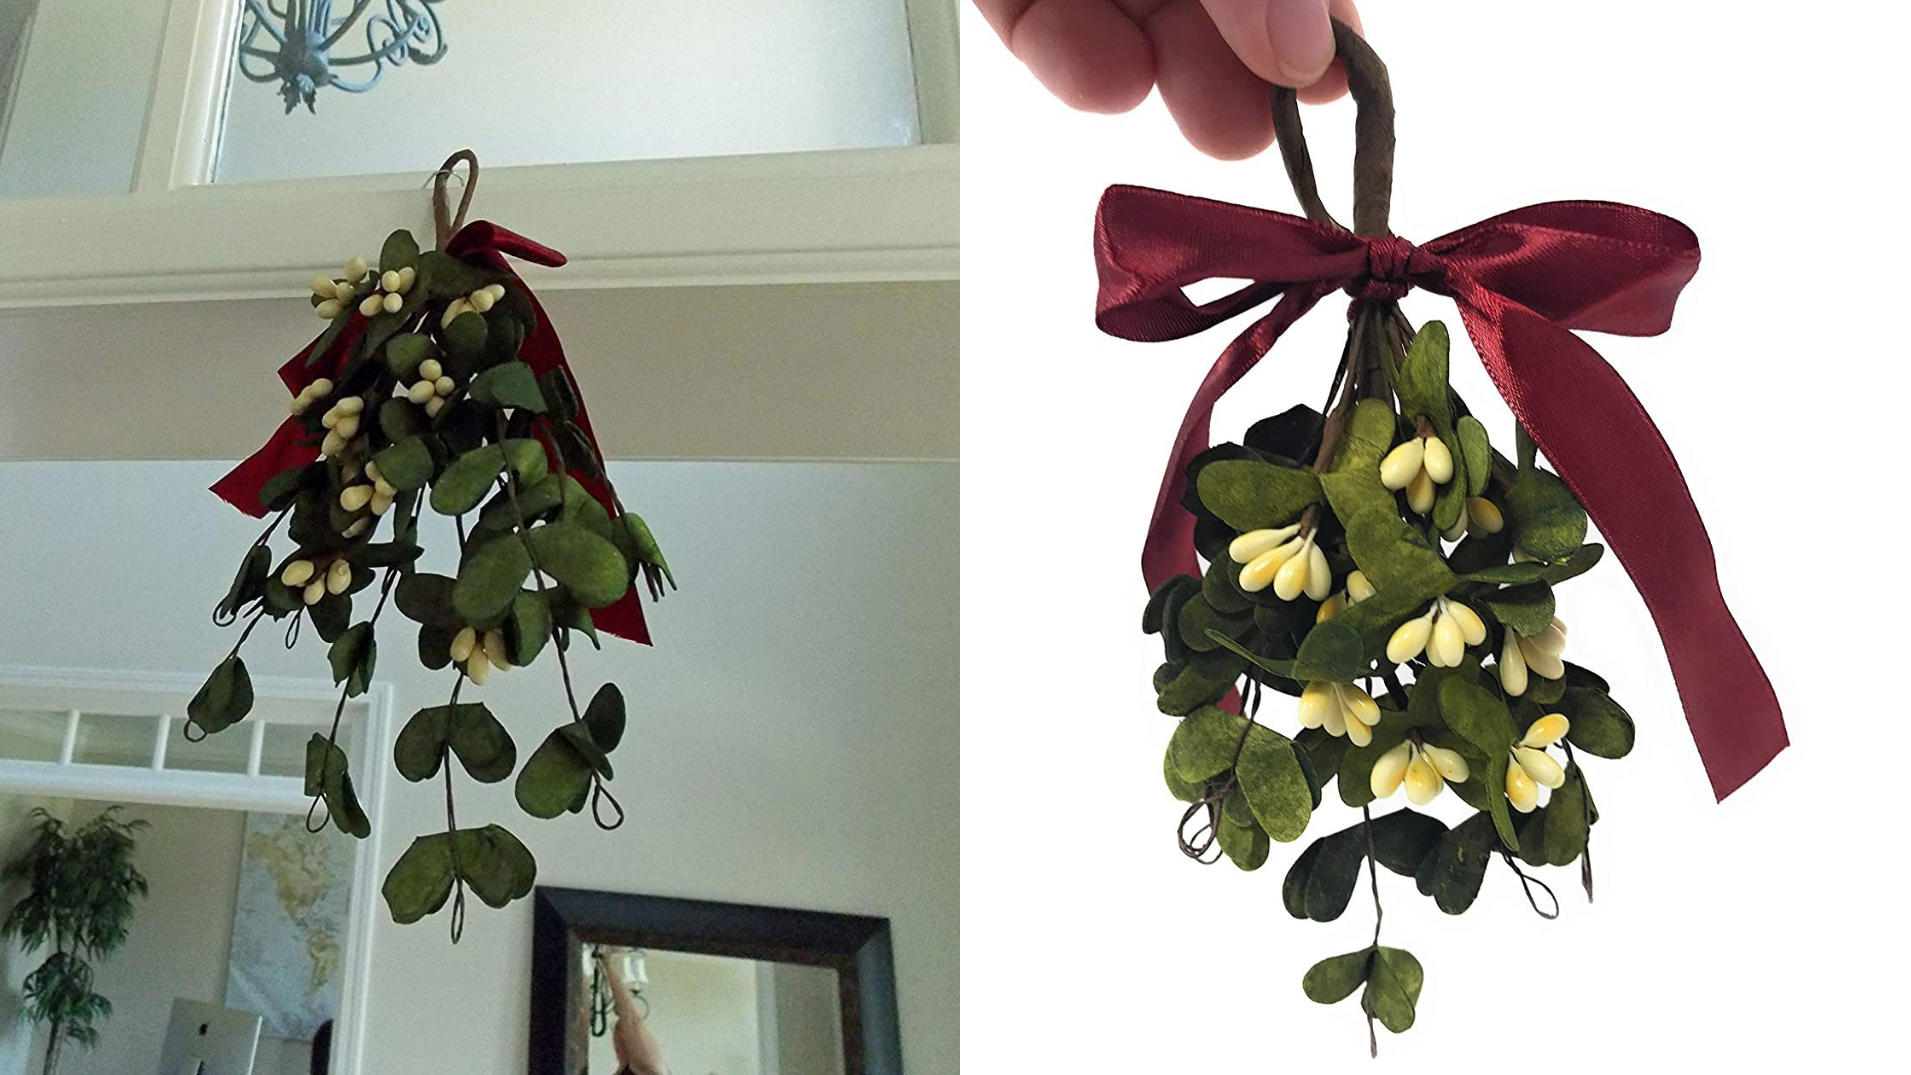 A mistletoe is a cheeky piece of décor that just may inspire a Hallmark movie-like experience.